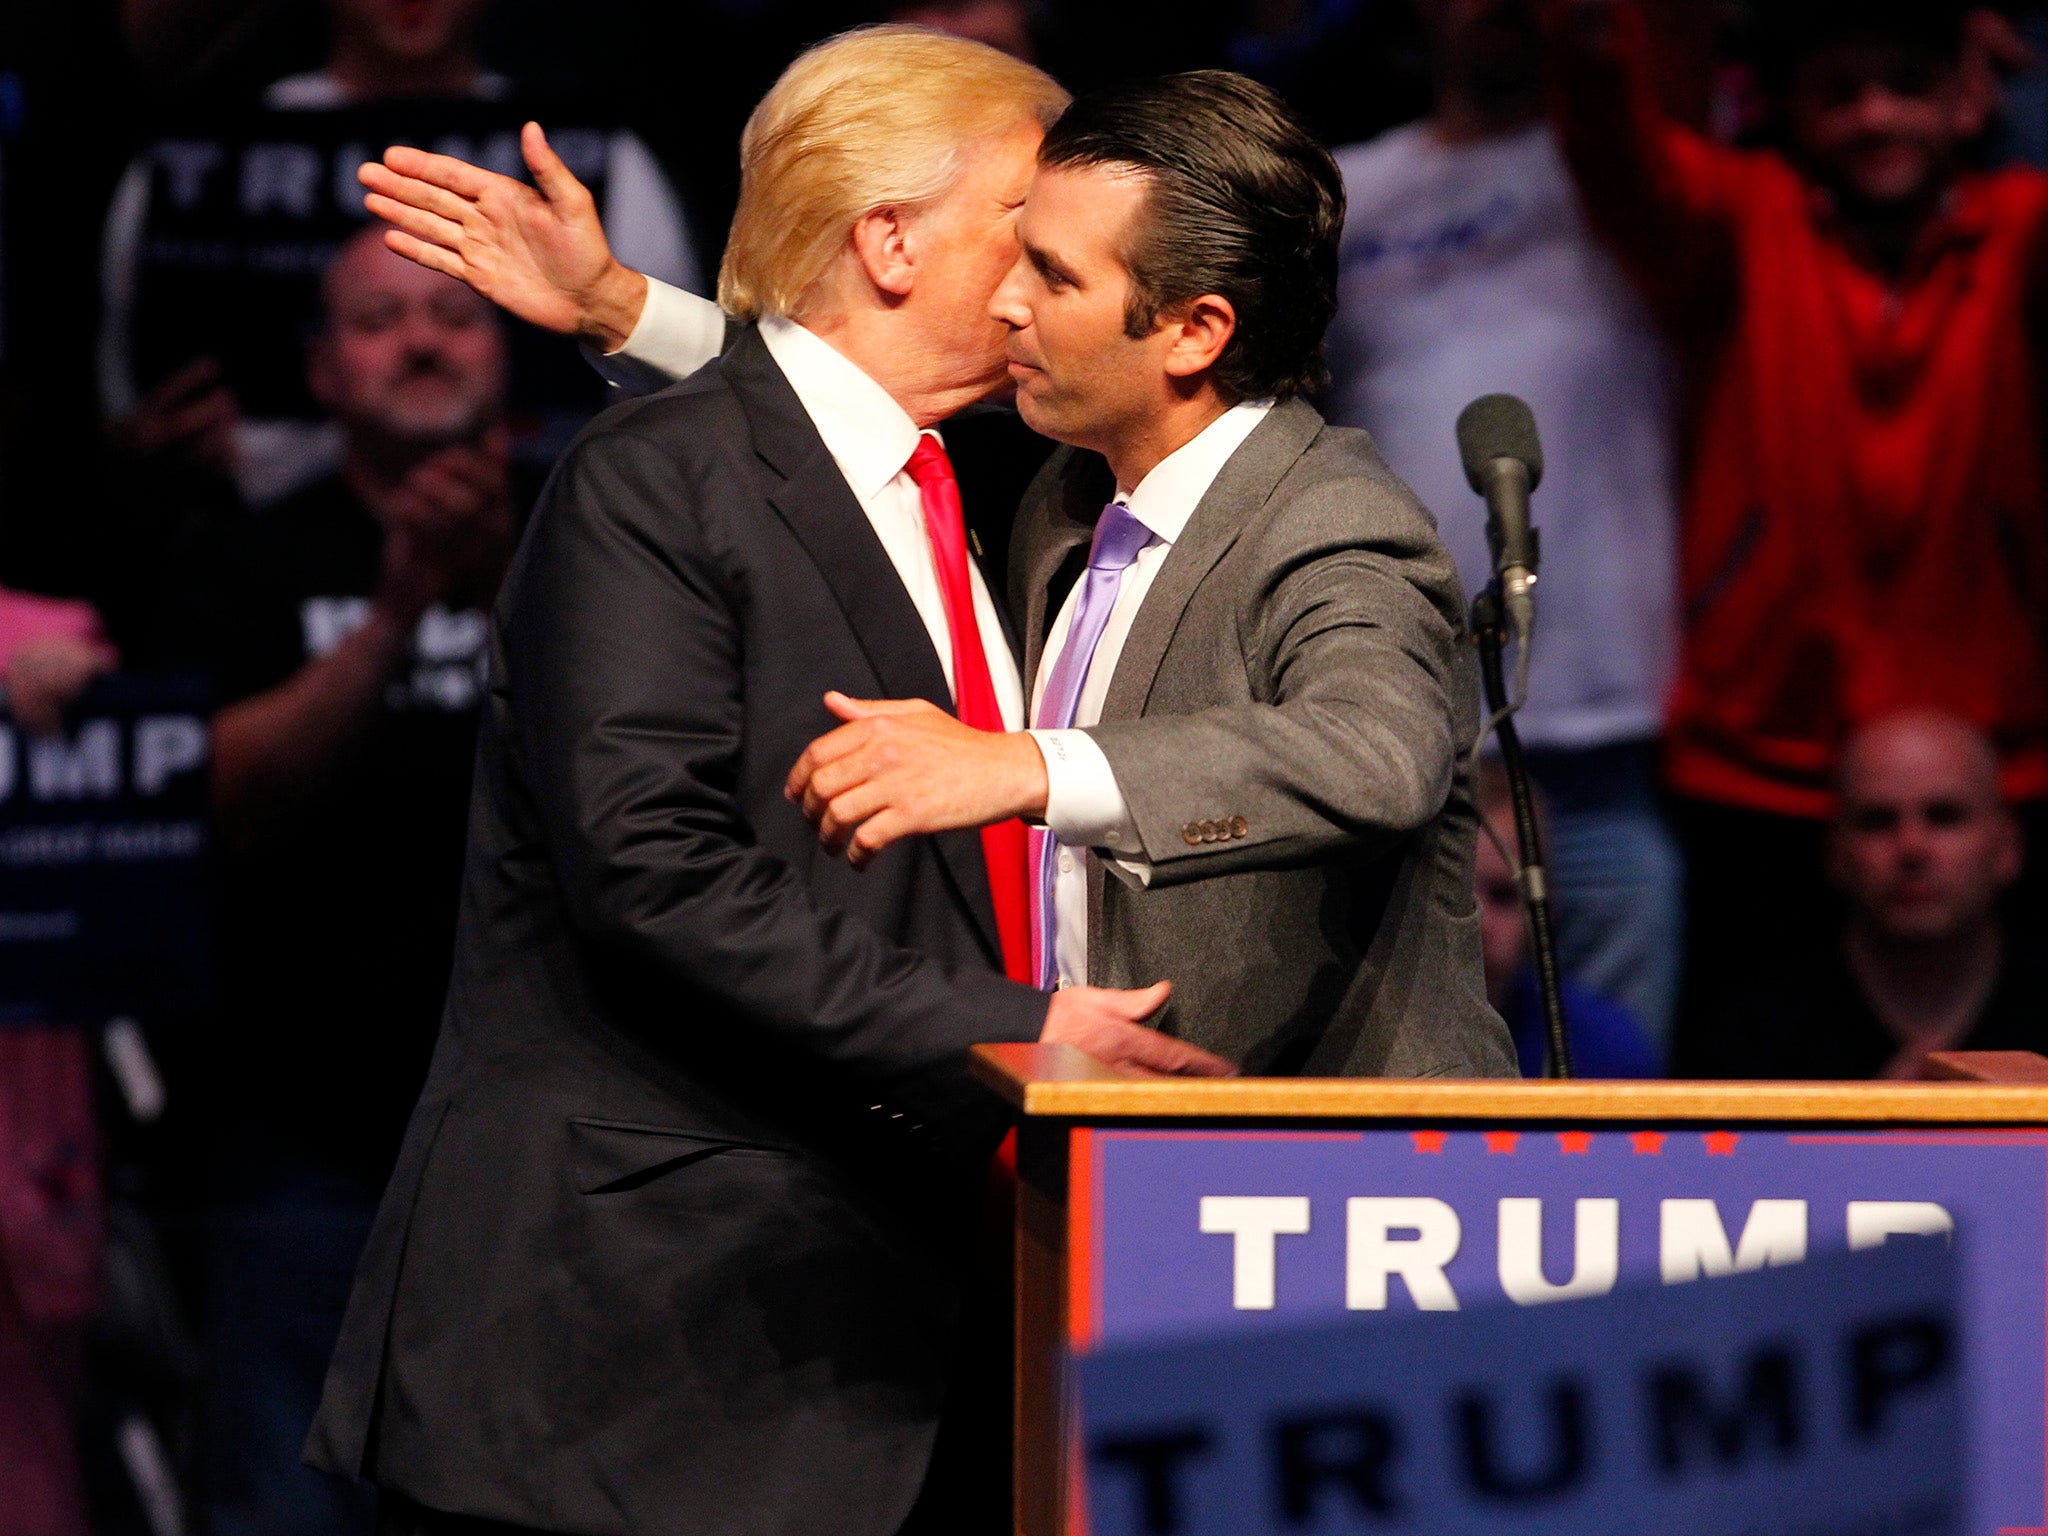 Donald Trump Jr. hugs his dad Donald Trump after addressing the crowd during a campaign rally at the Indiana Farmers Coliseum on April 27, 2016